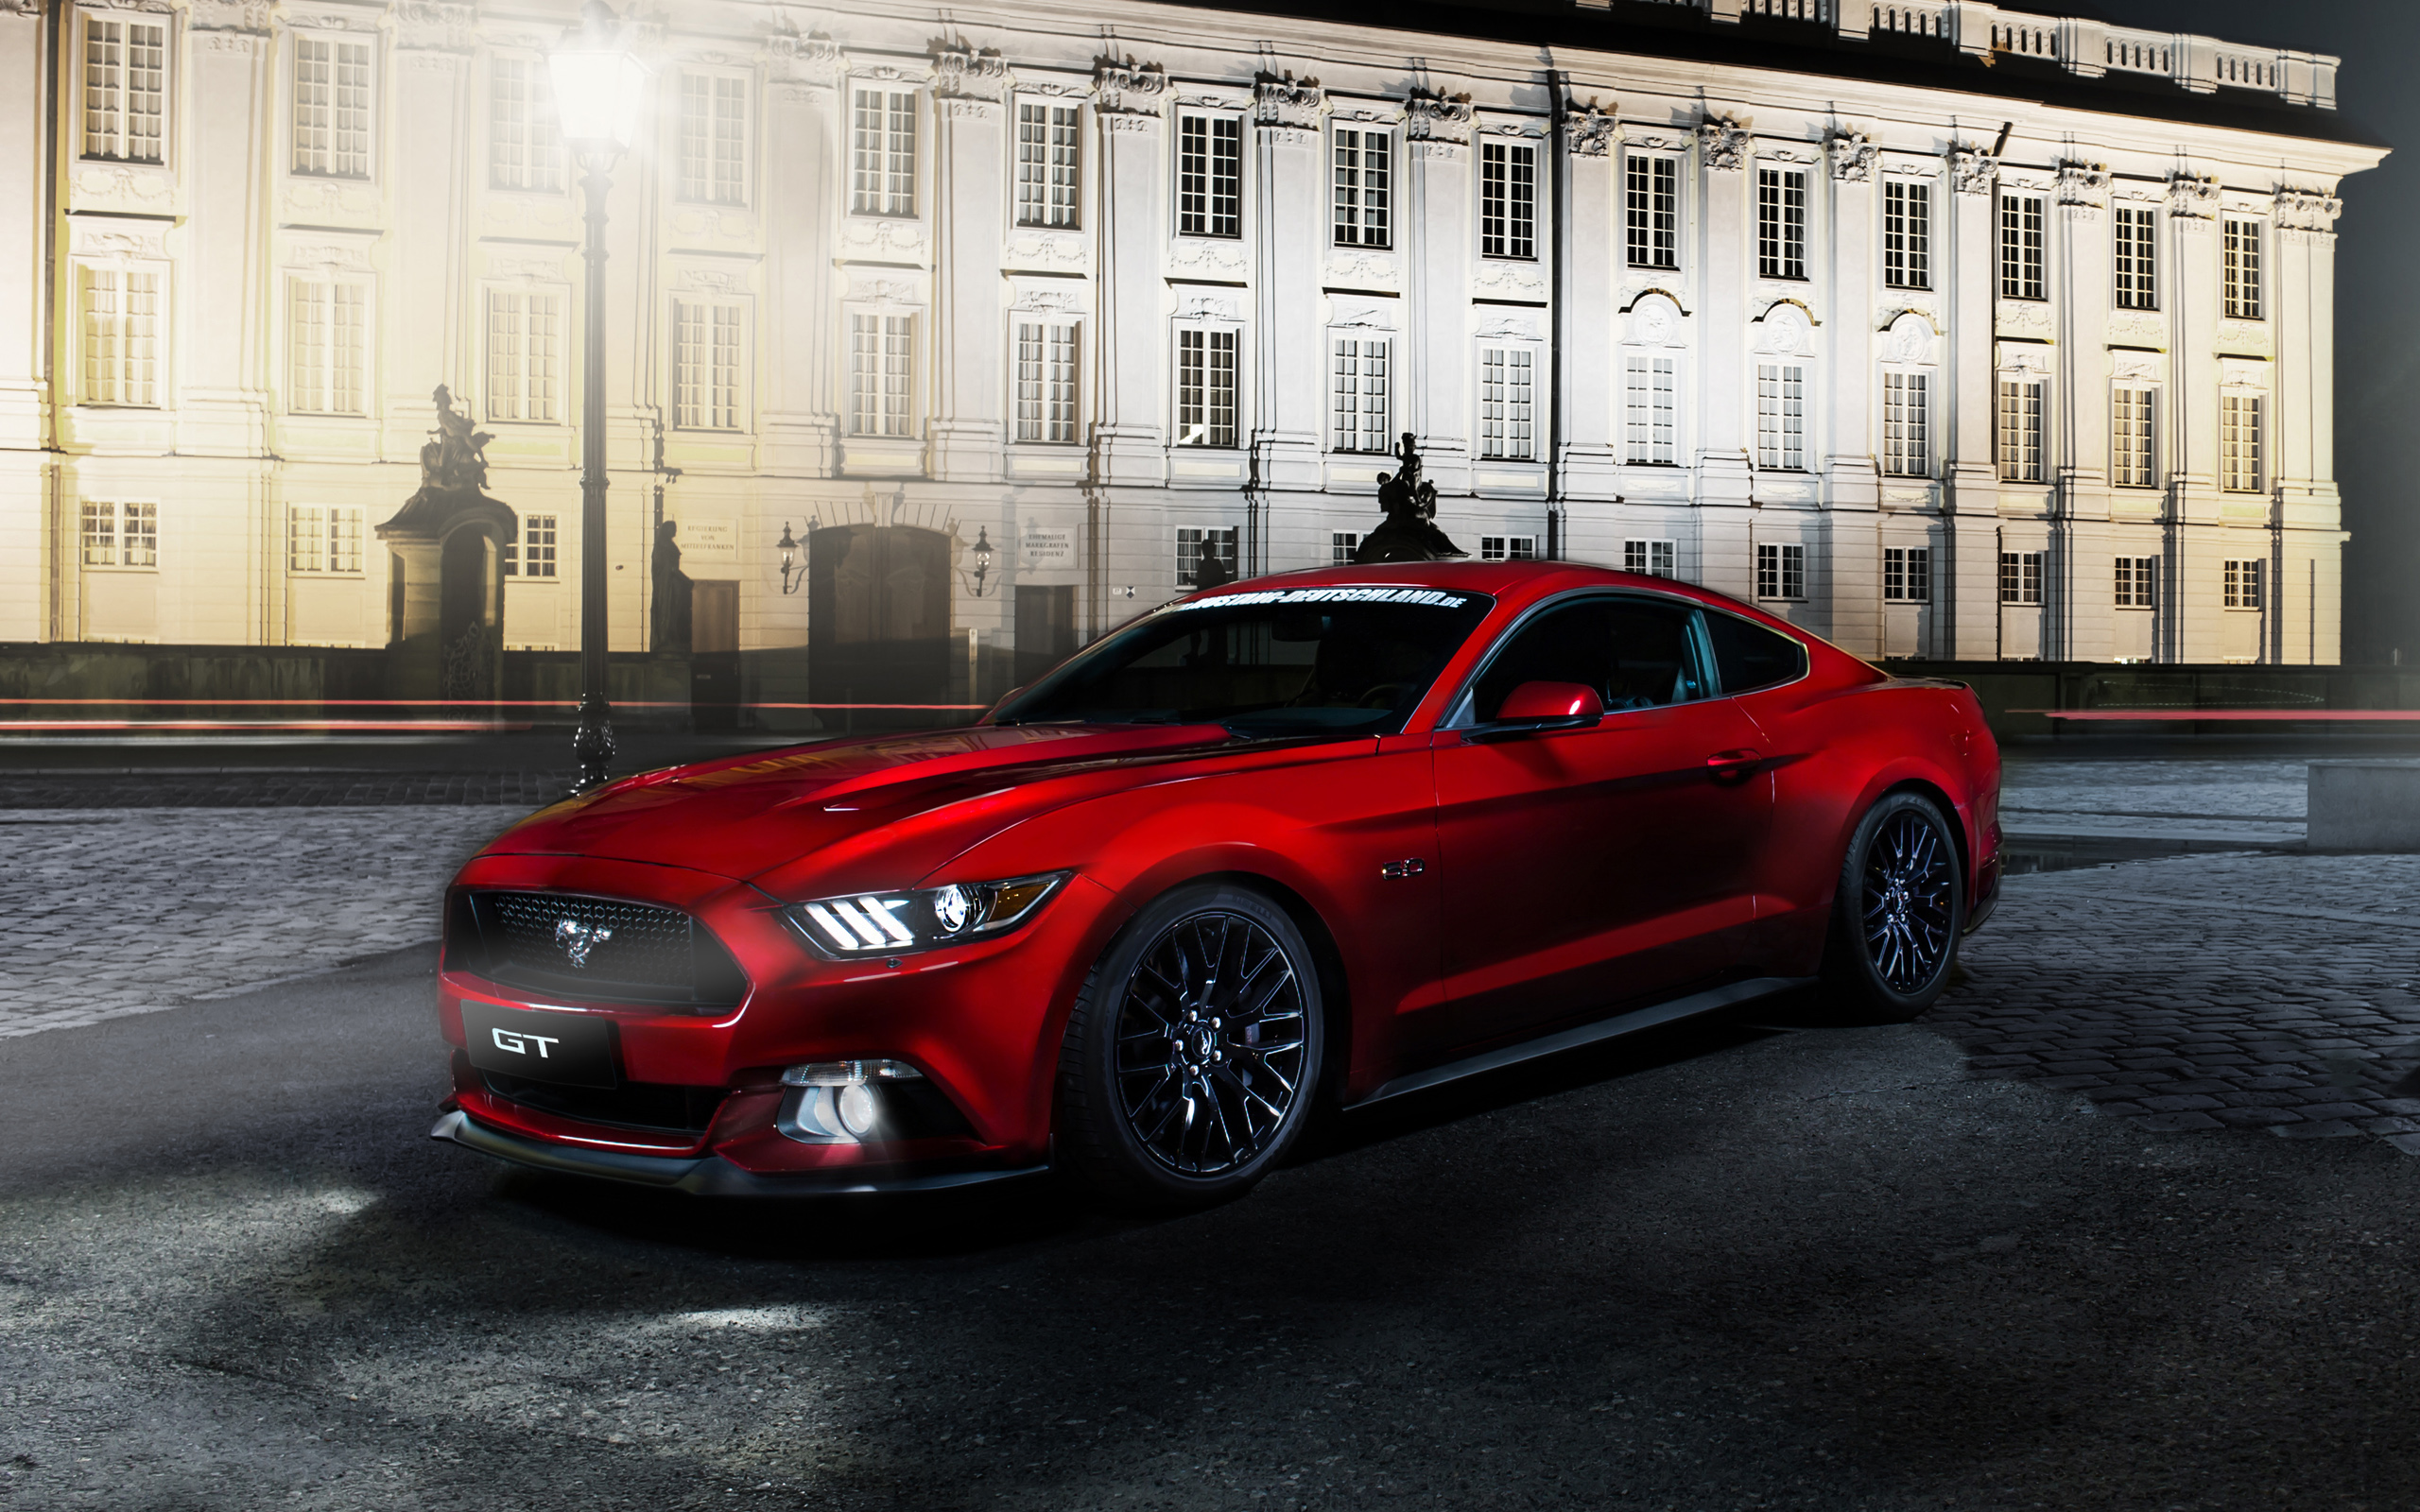 50+ 92 Mustang Gt Wallpaper For Android free download